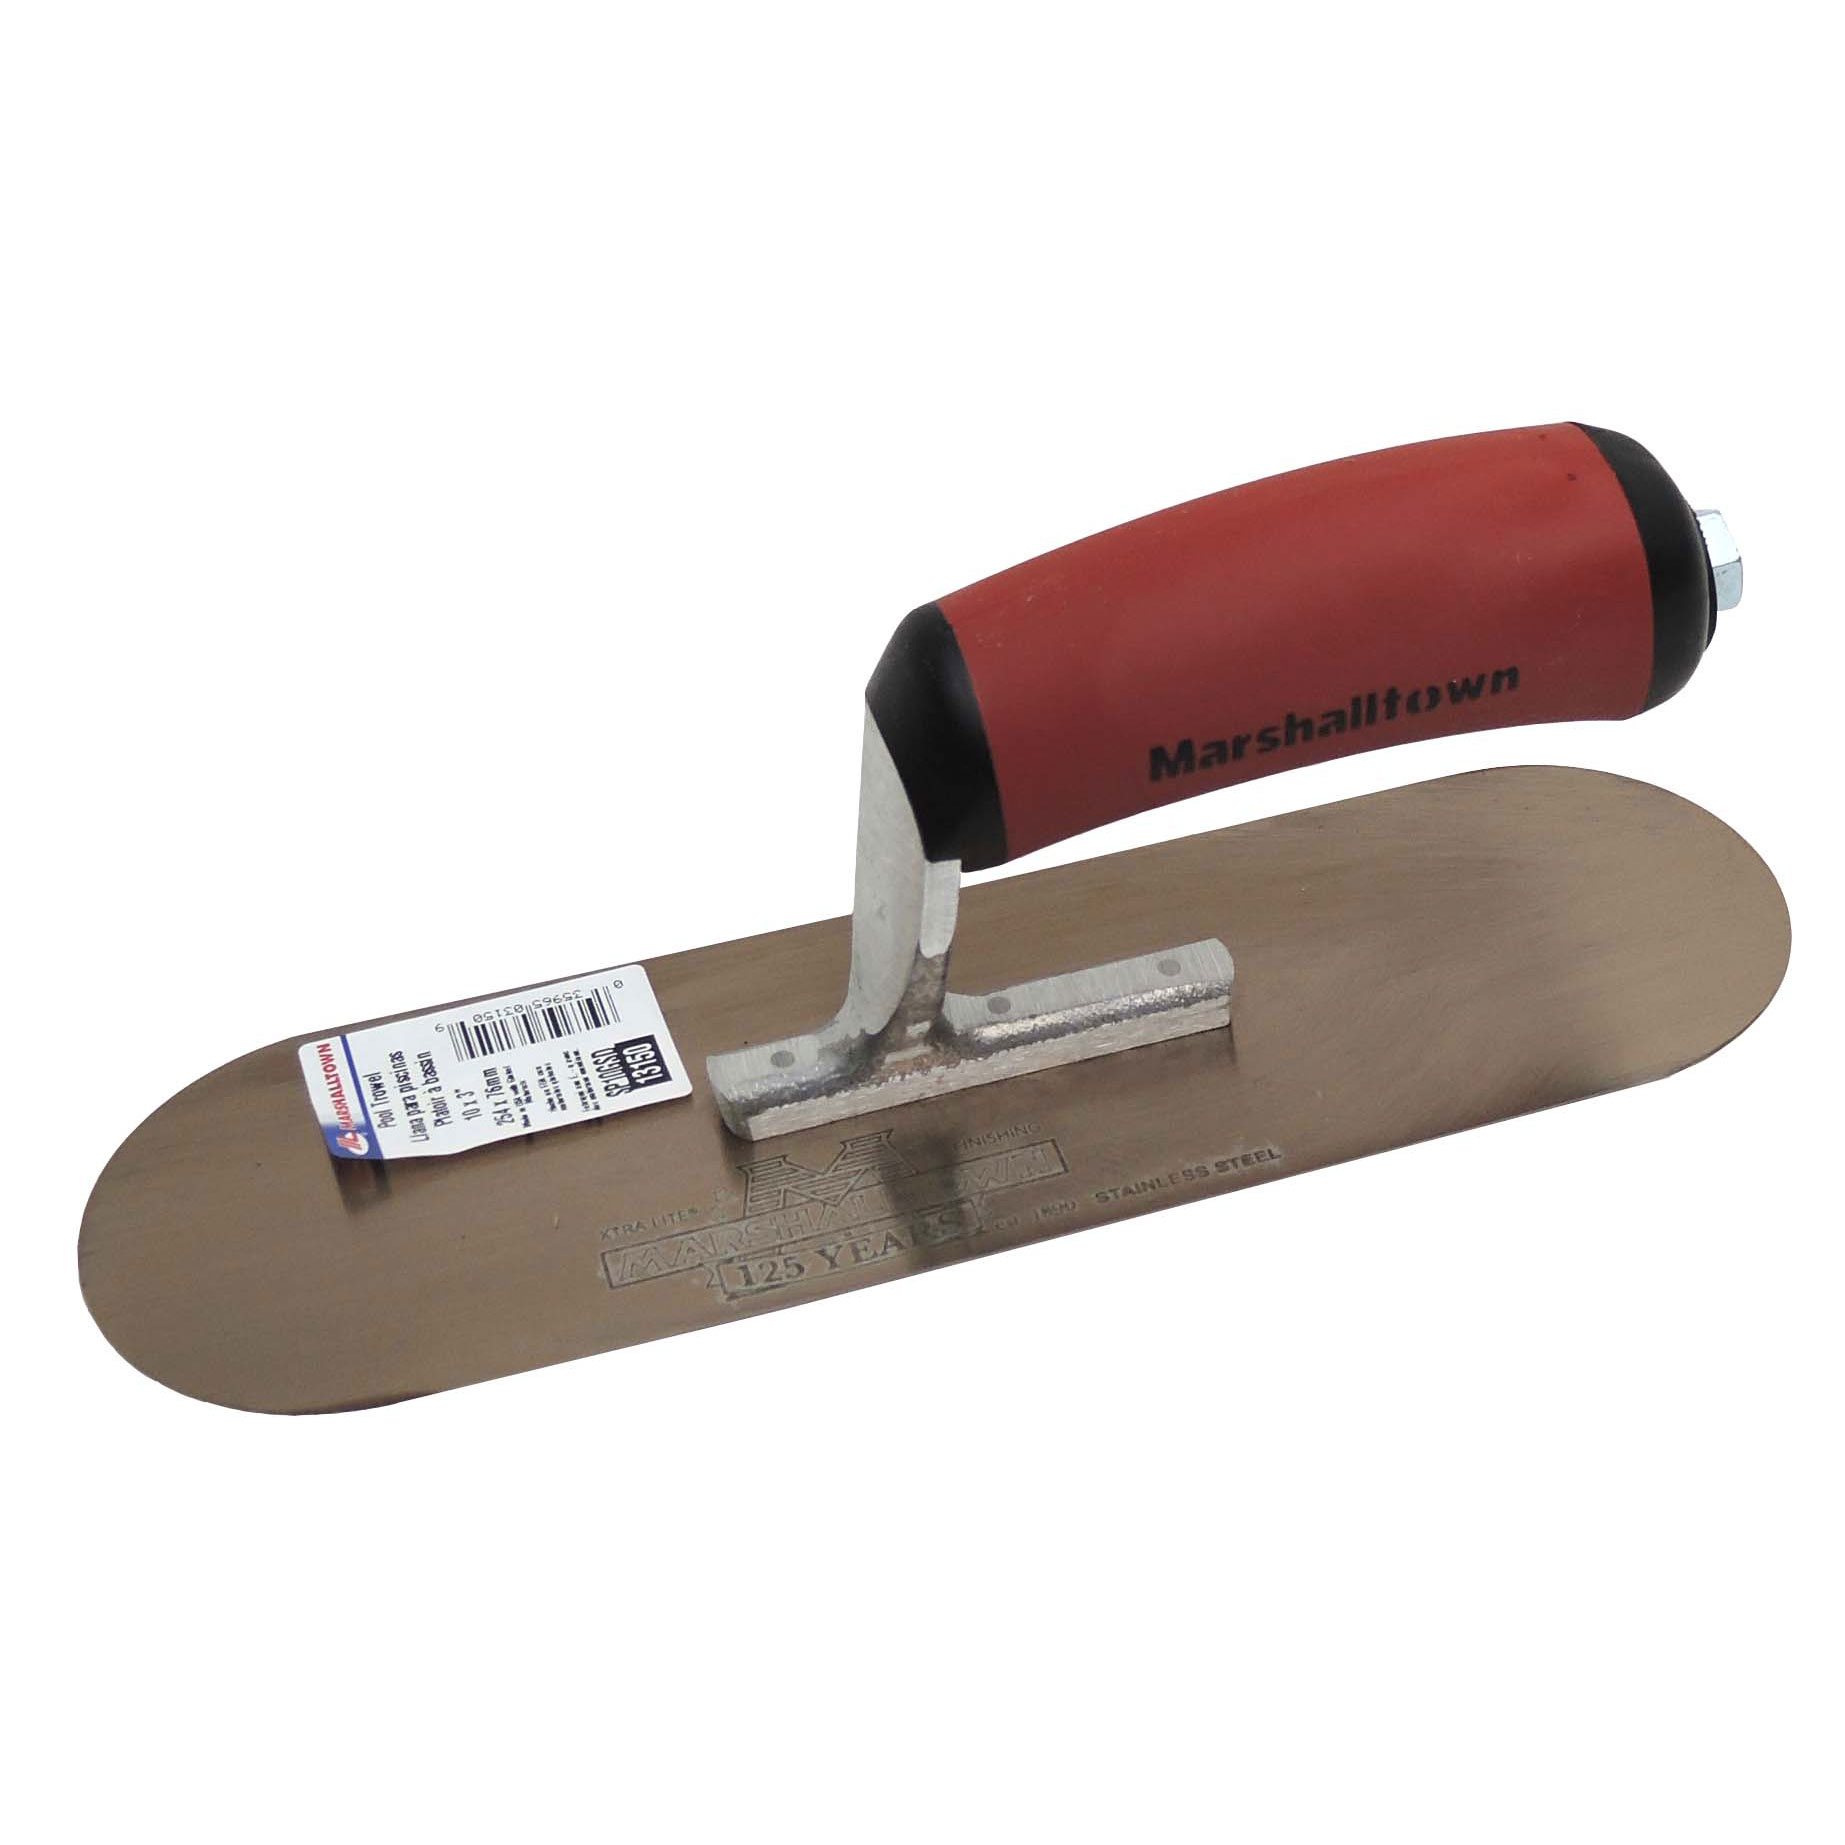 Marshalltown SP10GSD 10in x 3in Golden Stainless Steel Pool Trowel with DuraSoft Handle SP10GSD